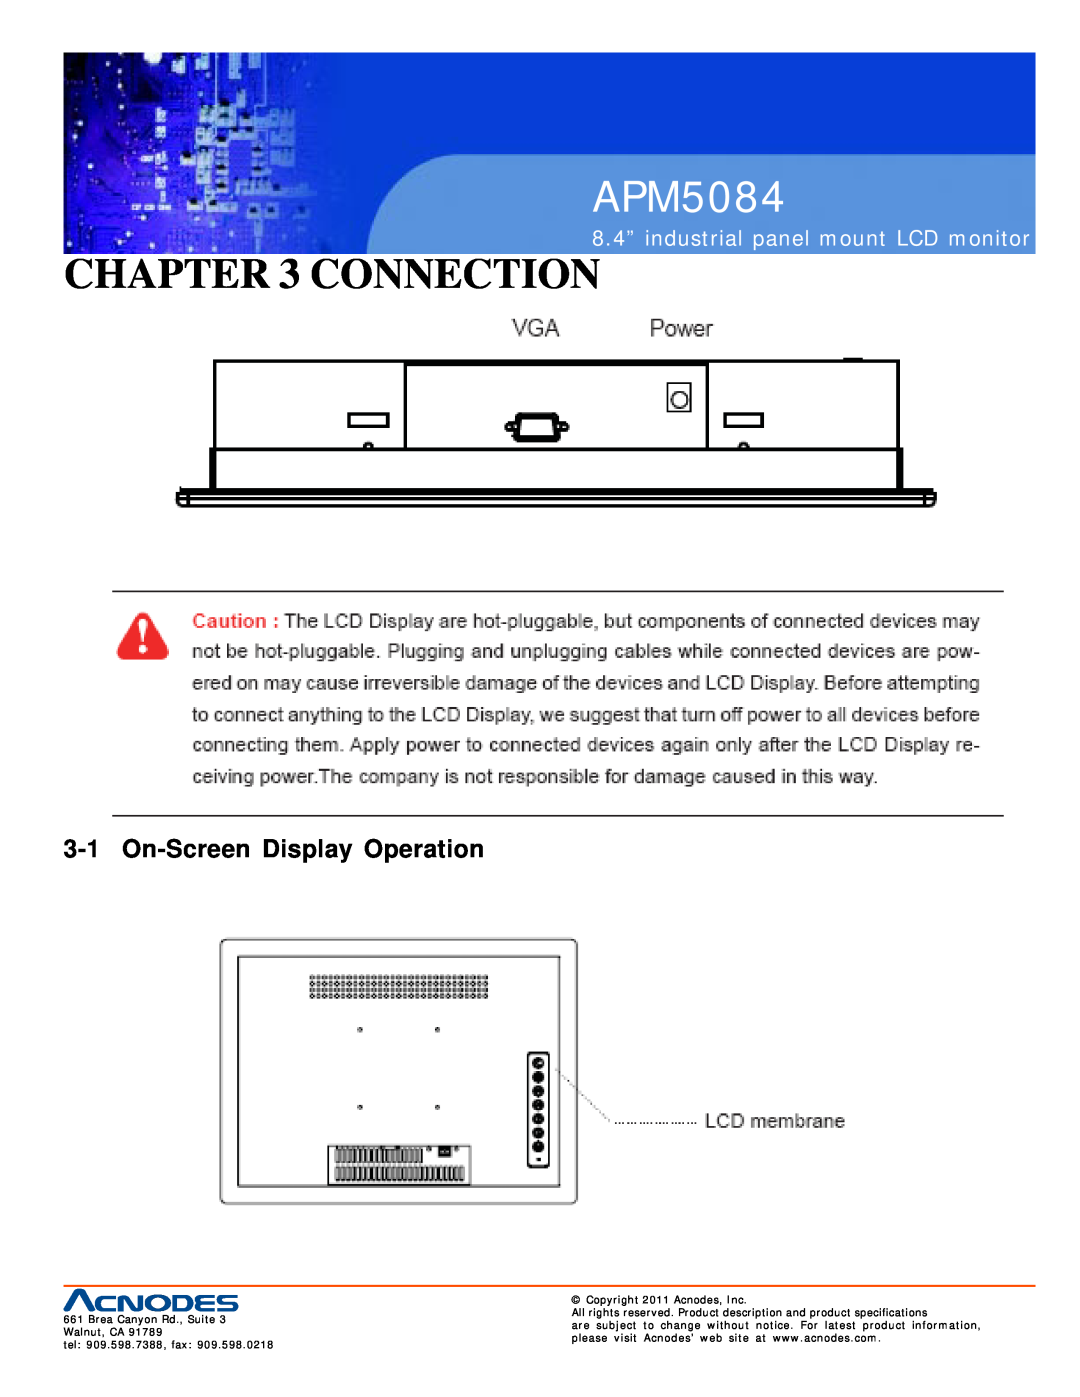 Acnodes APM5084 user manual Connection, 8.4” industrial panel mount LCD monitor, Copyright 2011 Acnodes, Inc 